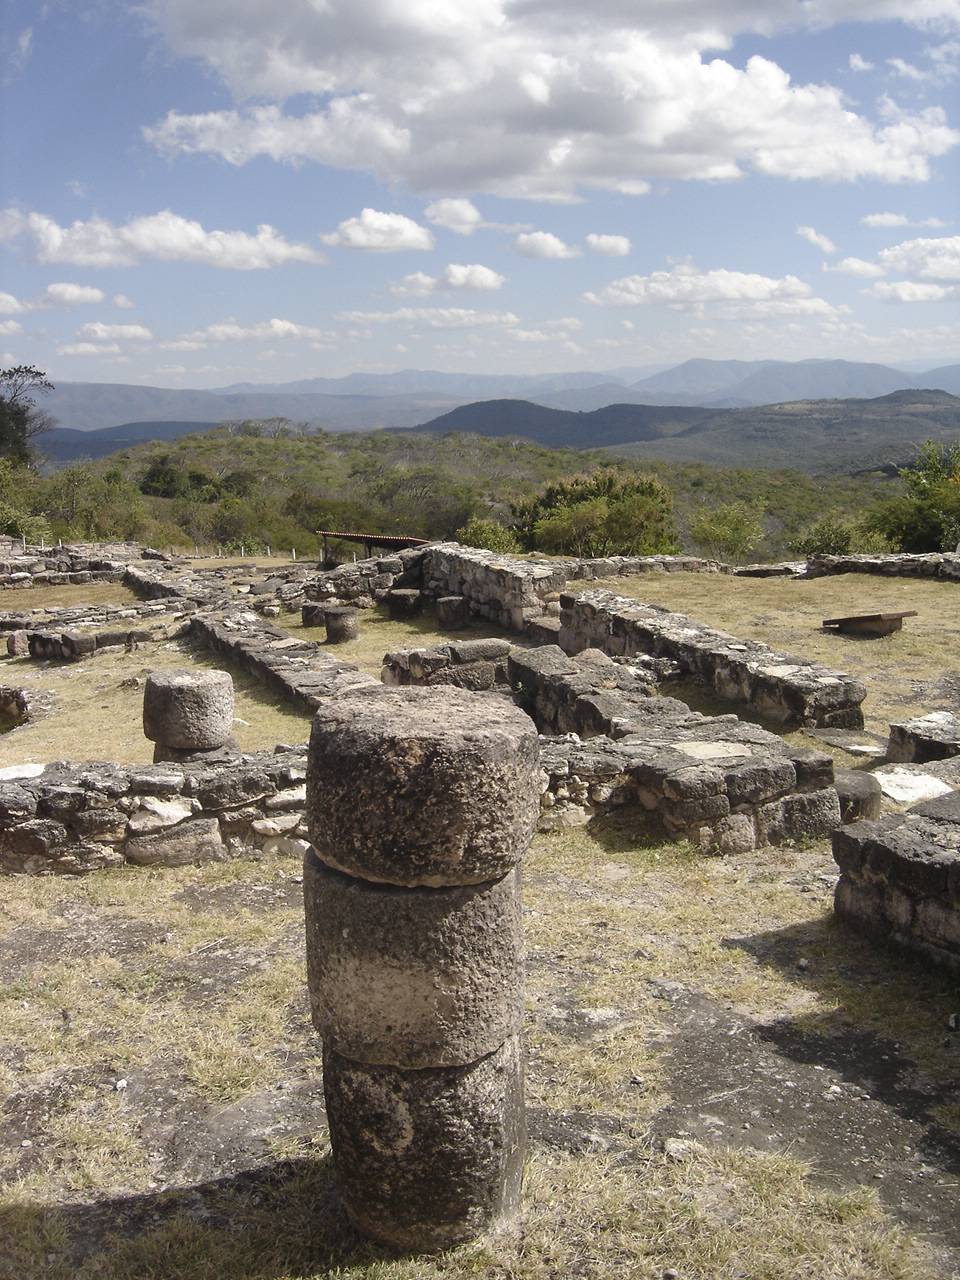 cuetlajuchitlán: a historical journey through time